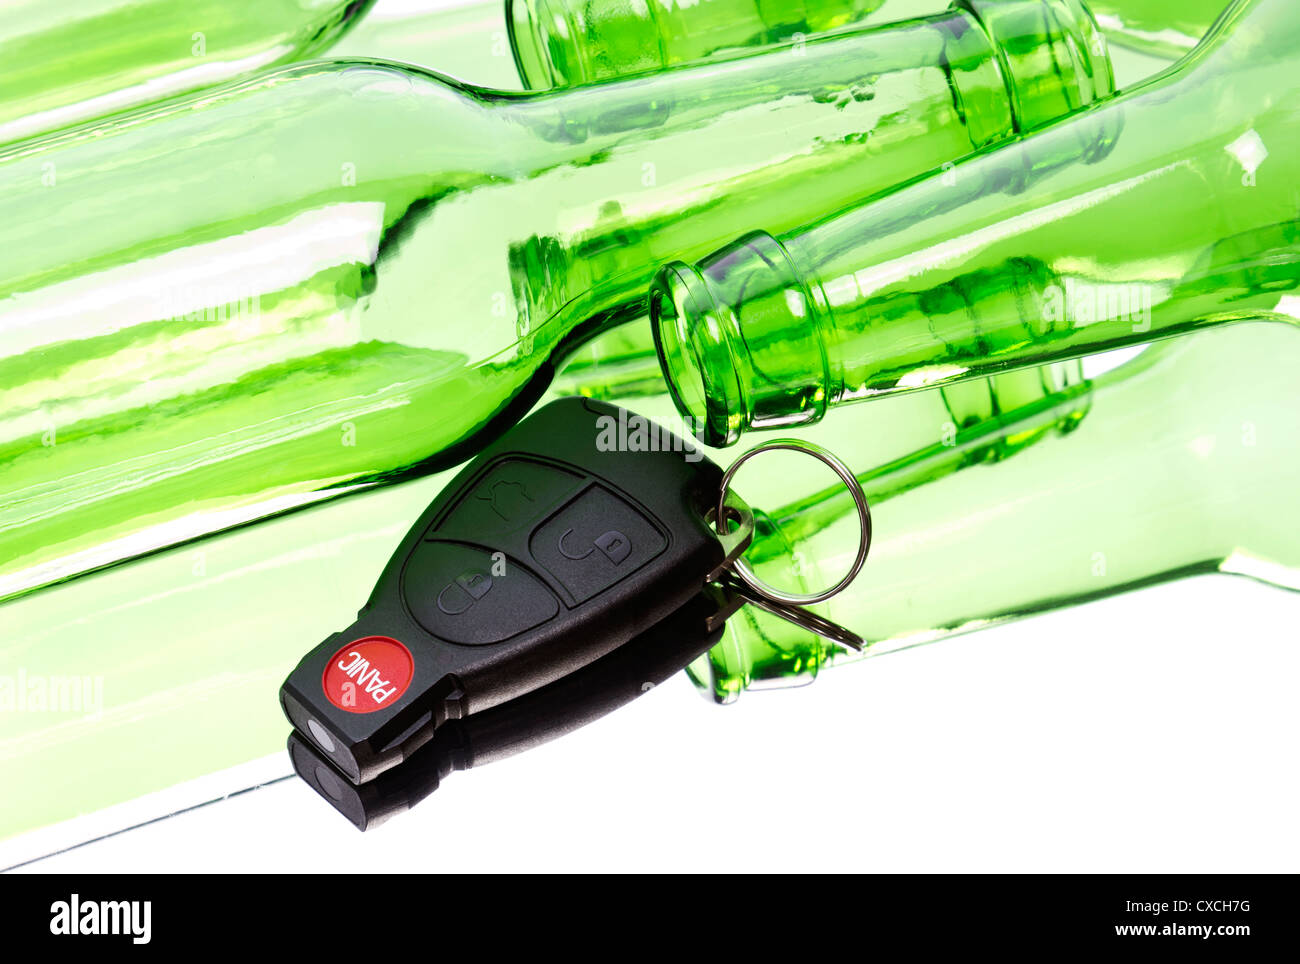 Car key and bunch of empty glass beer bottles to illustrate drunk driving concept. Stock Photo